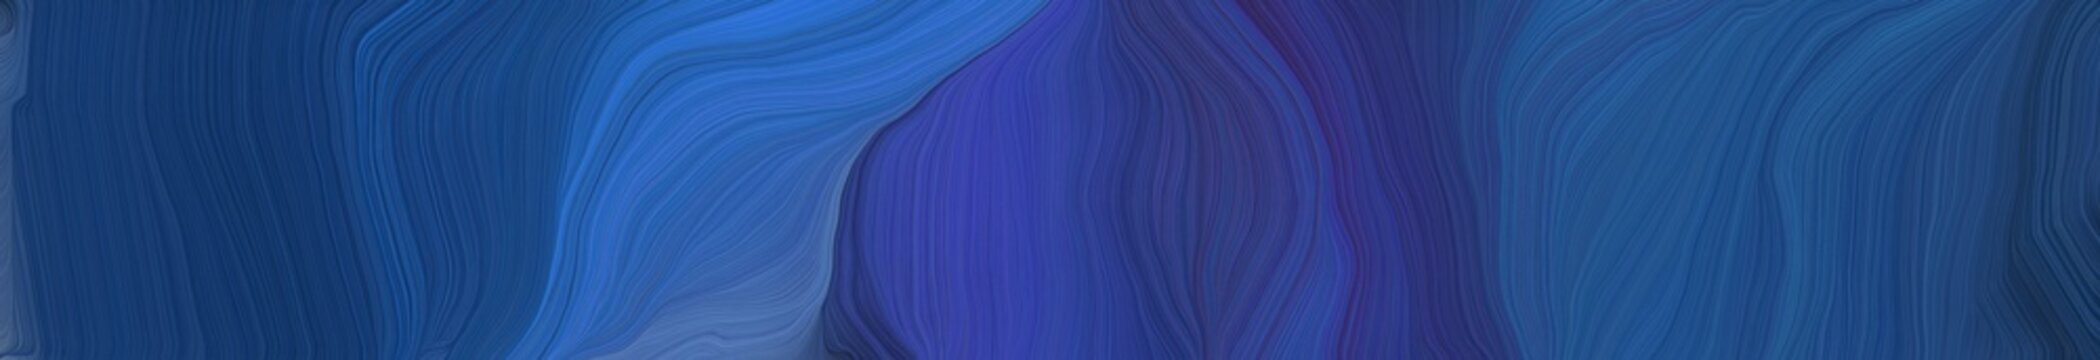 beautiful wide colored banner with dark slate blue, teal blue and royal blue color. elegant curvy swirl waves background illustration © Eigens